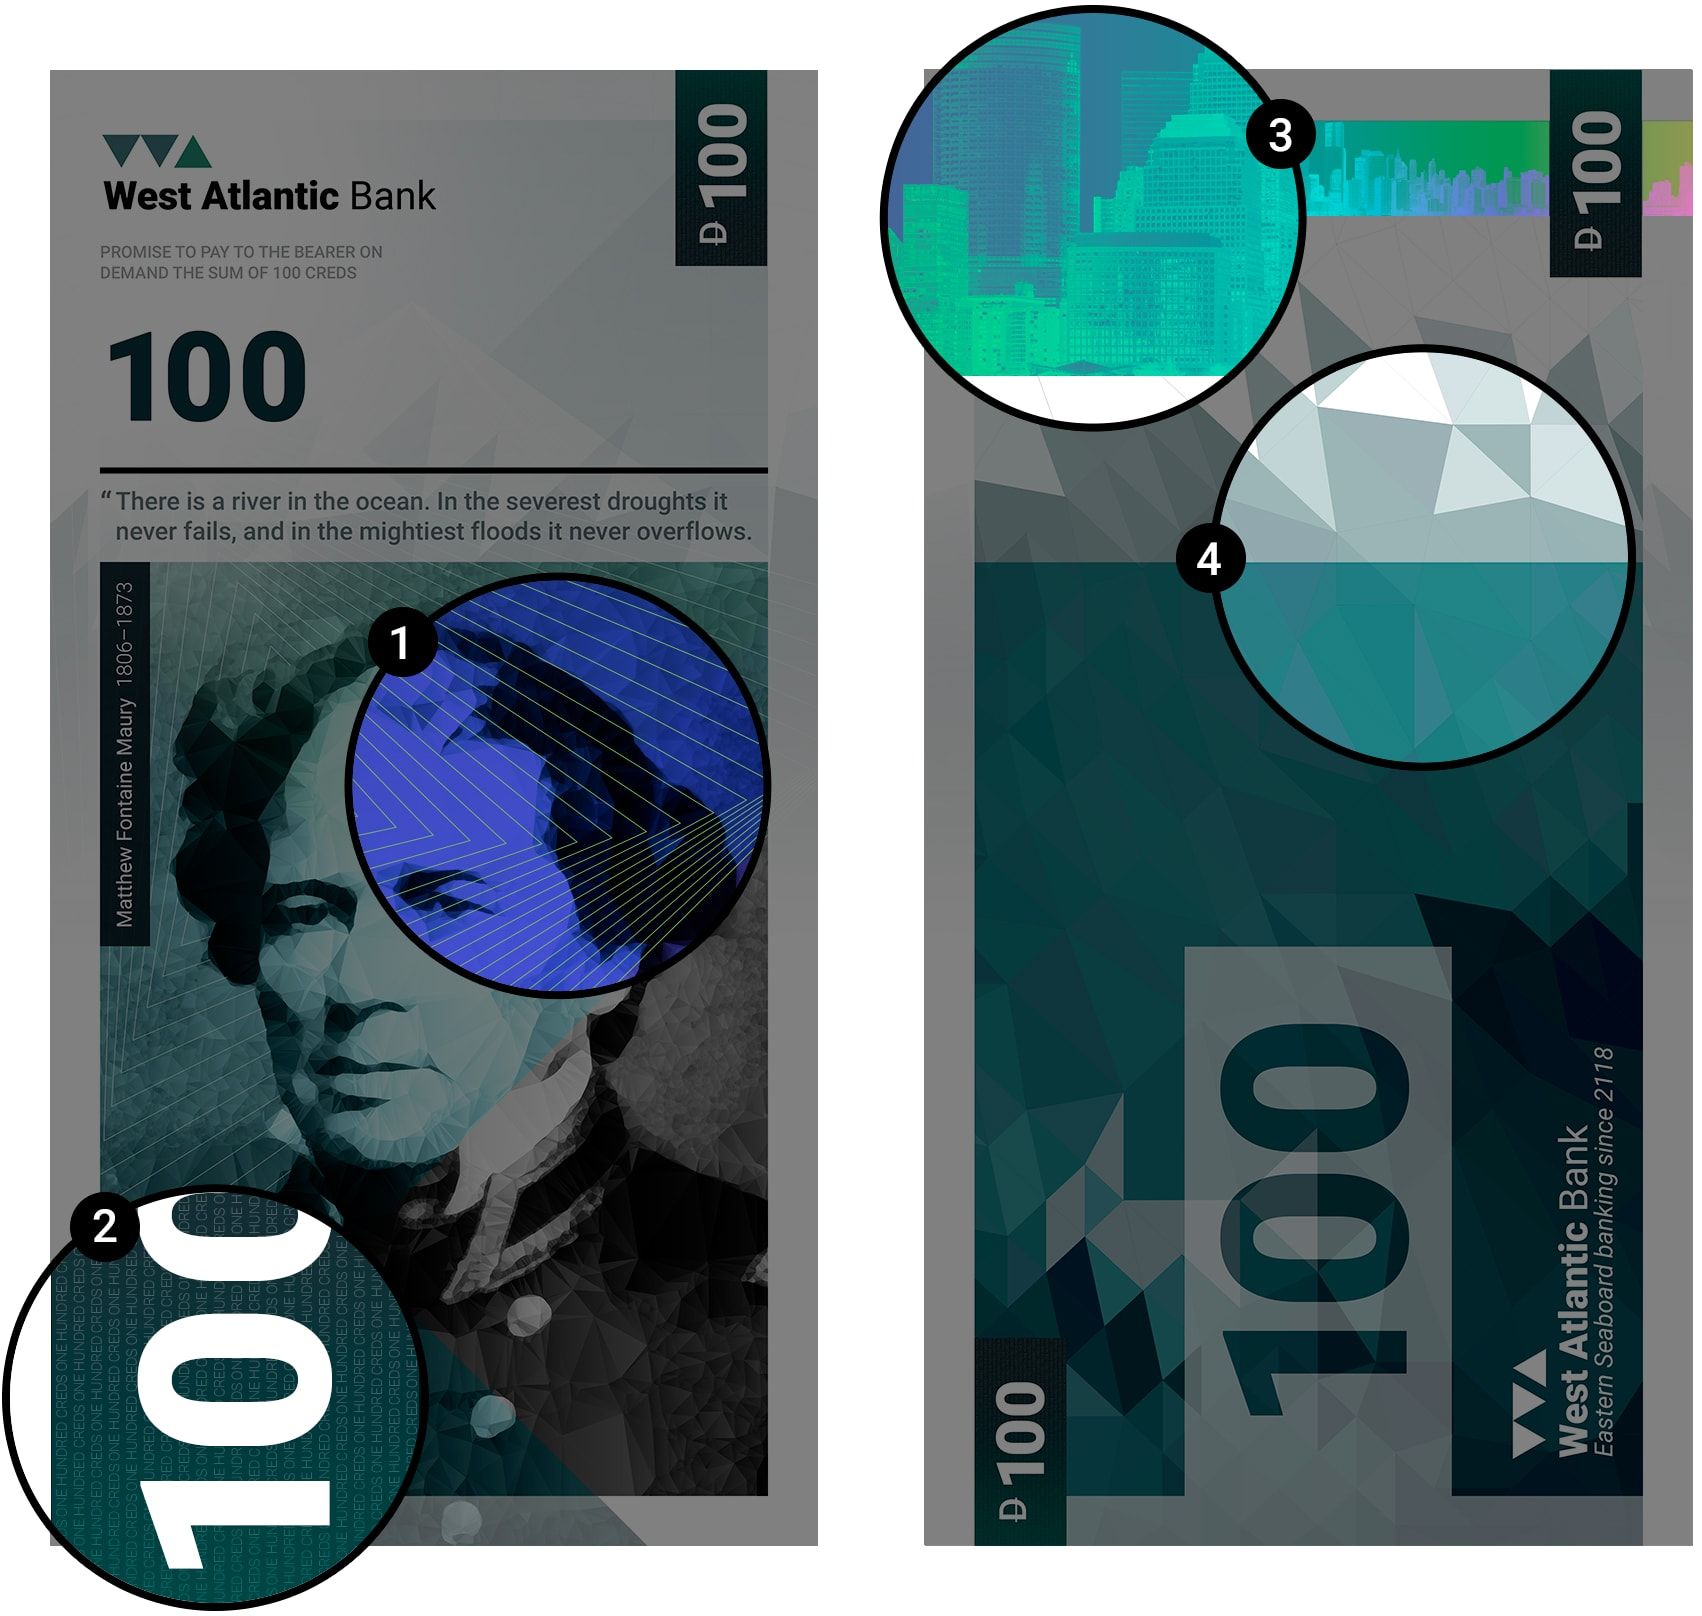 Banknote security features